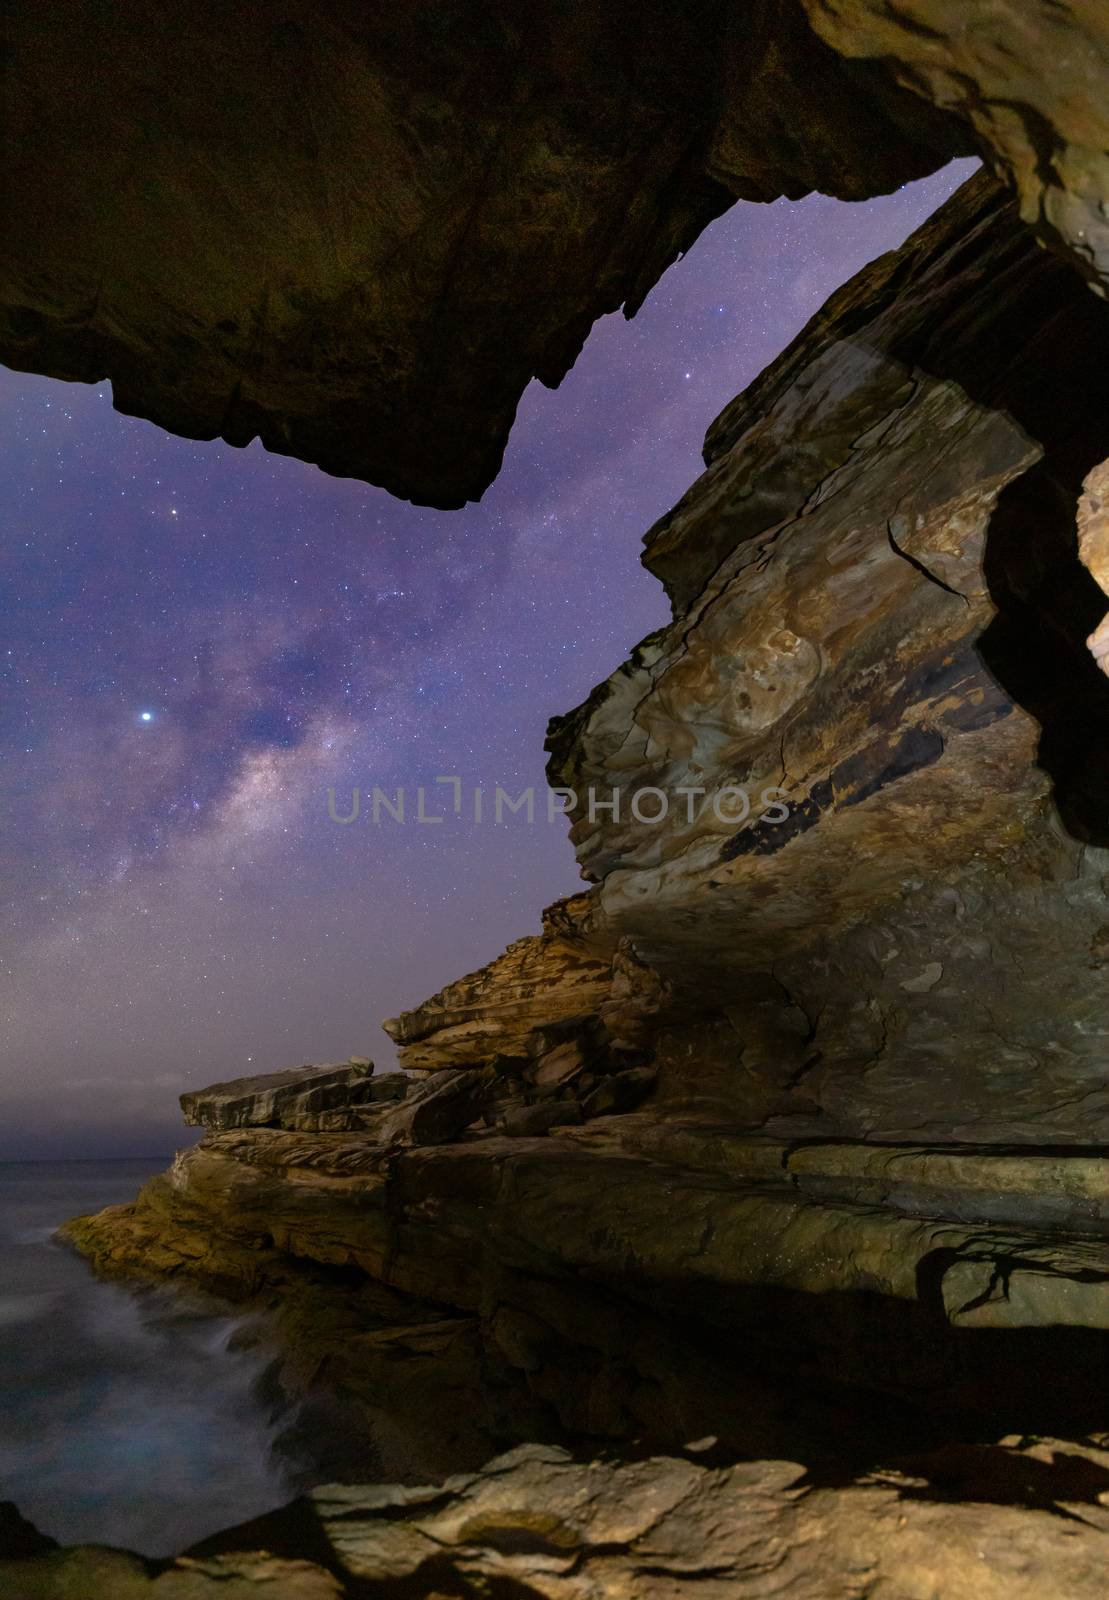 Lined up the Milky Way and galactic core rising over the Sydney sea coast down in the cliffs and aligned with the narrow gap in rock formations.  Vertical composition suitable for books, borchures or magazines